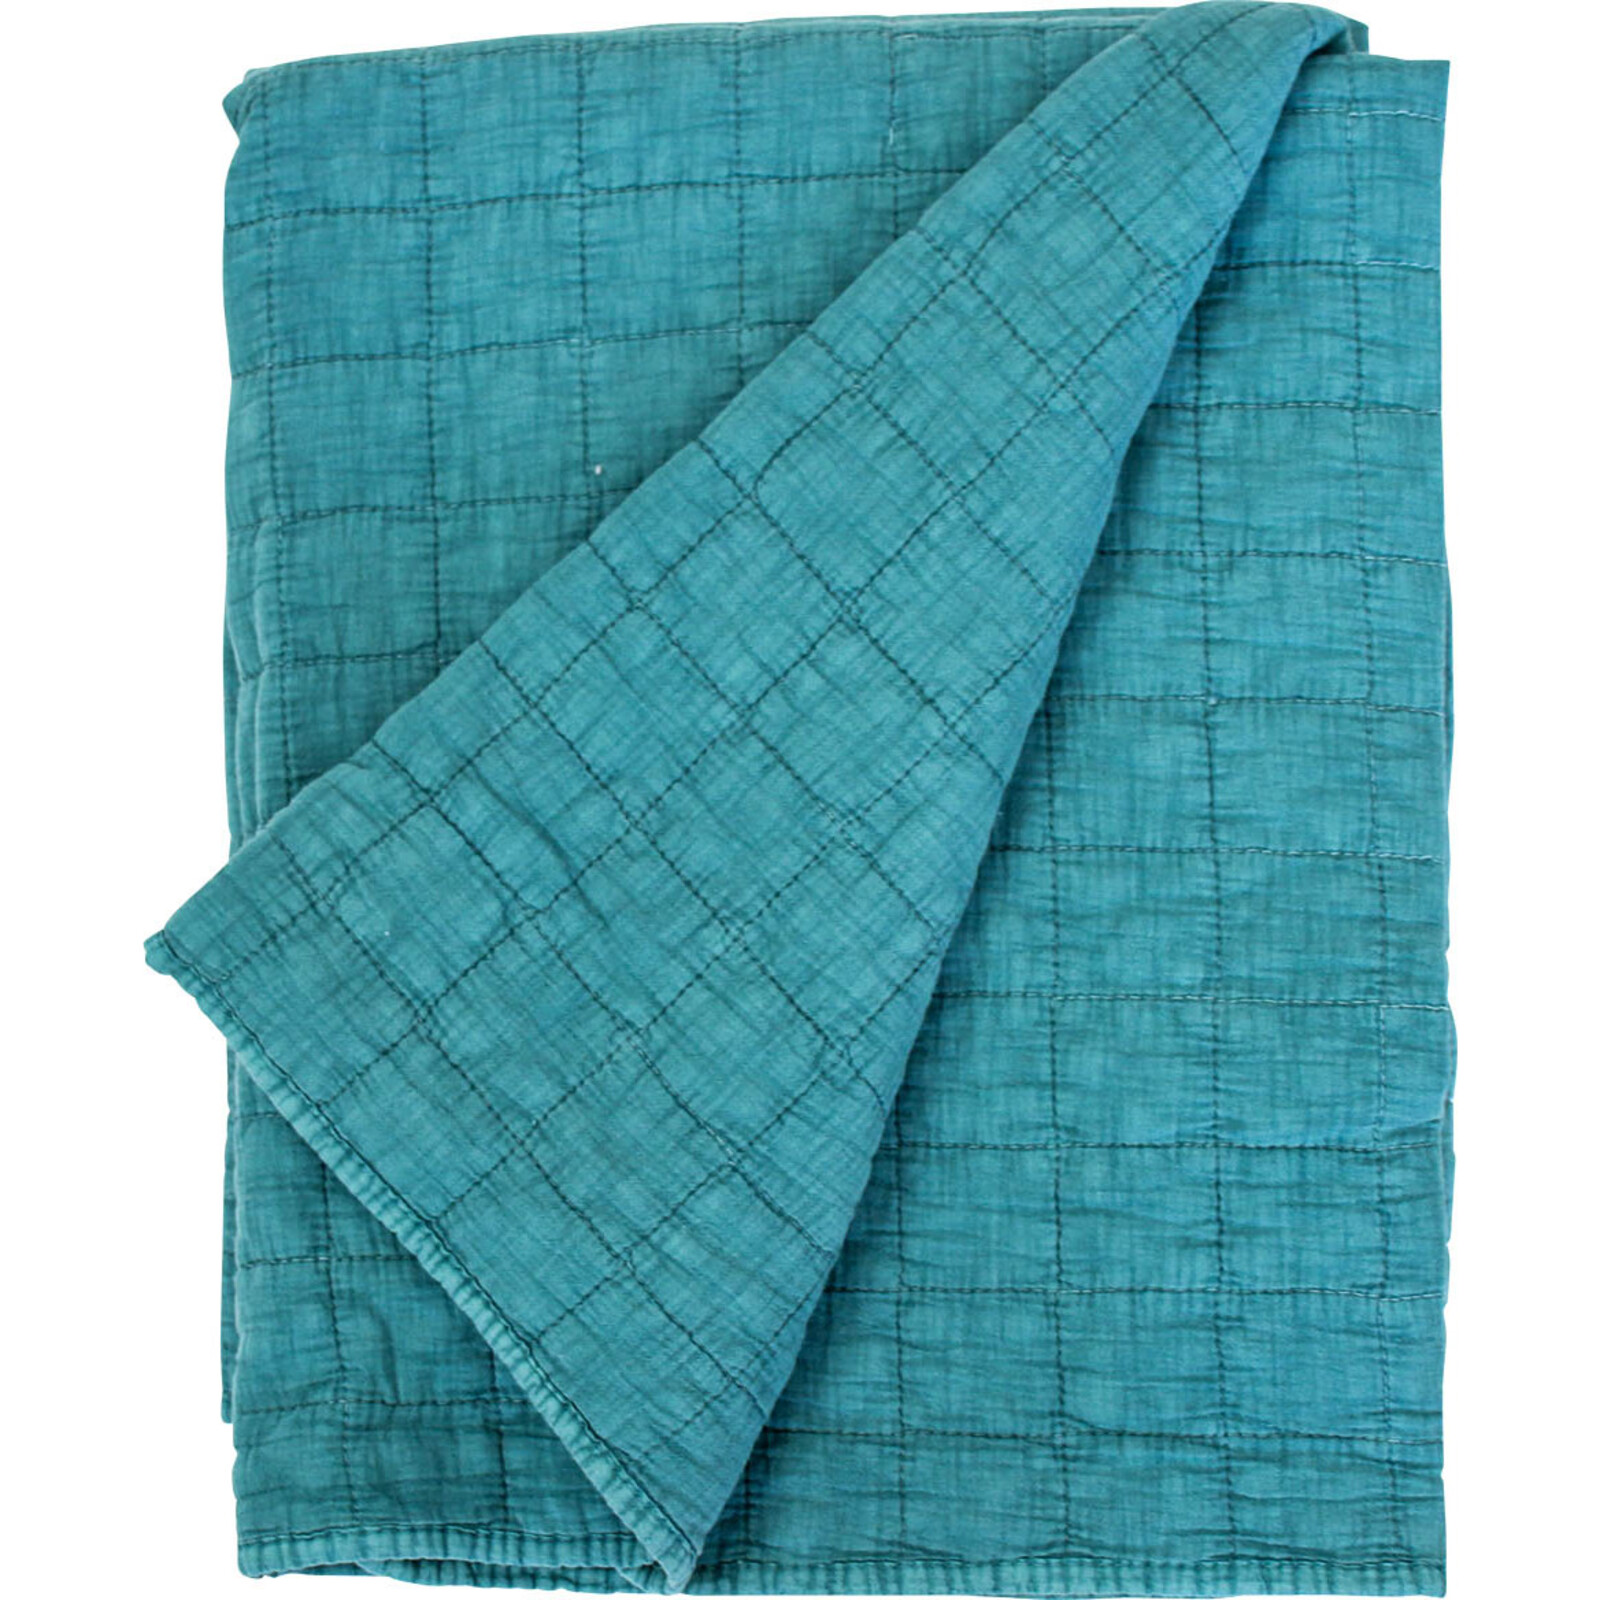 Throw Quilted Cotton Squares Azure